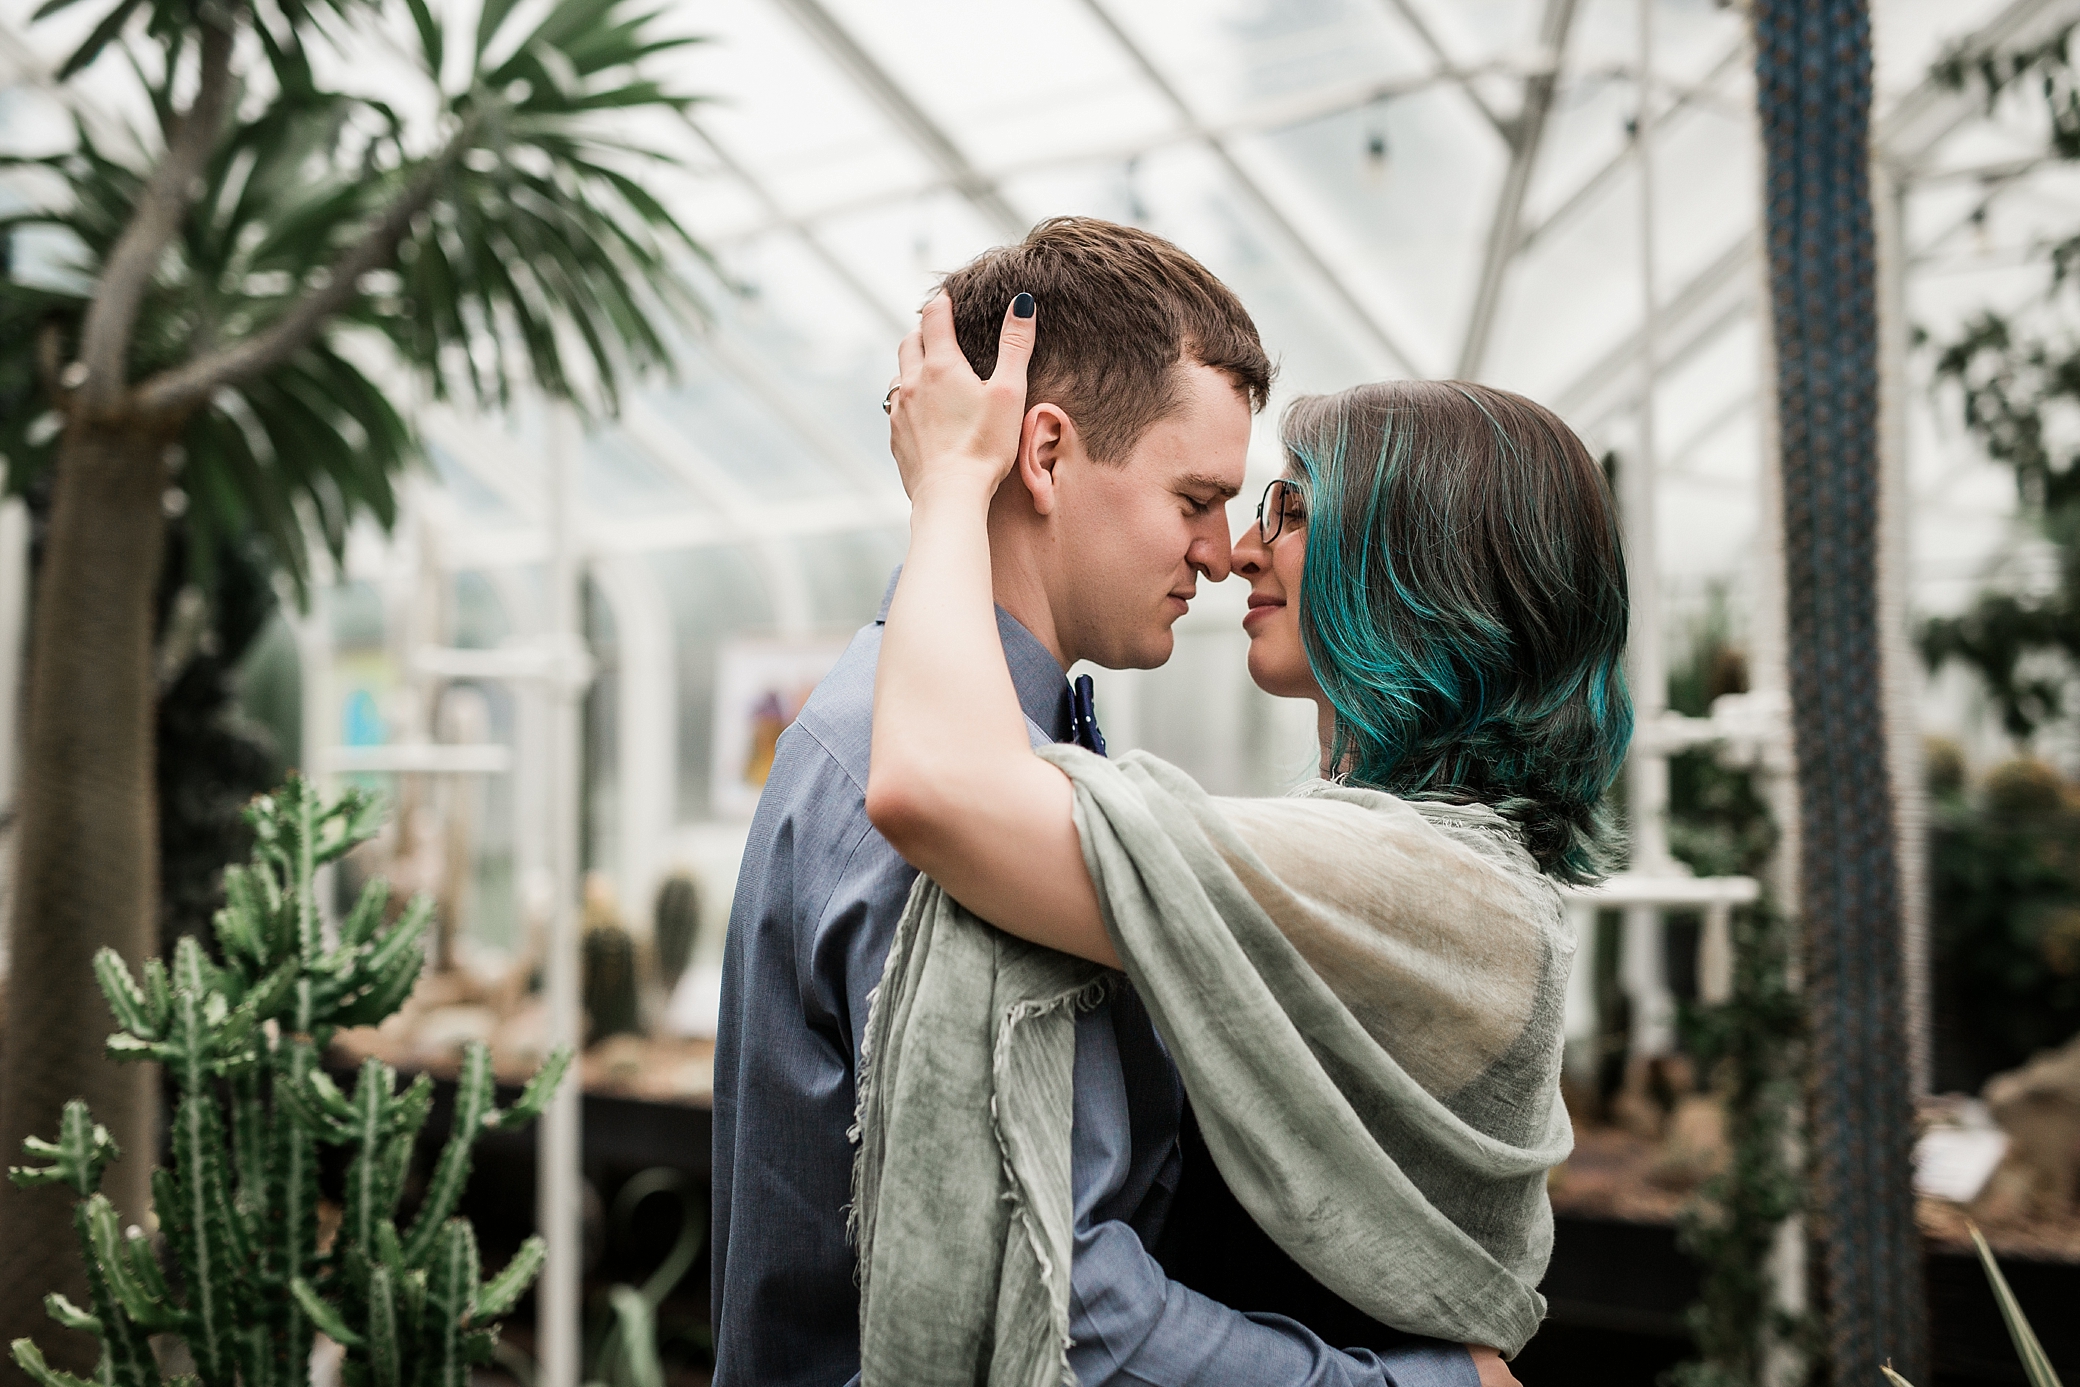 Bride and Groom Portraits at the Volunteer Park Conservatory photographed by Seattle Wedding Photographer, Megan Montalvo Photography